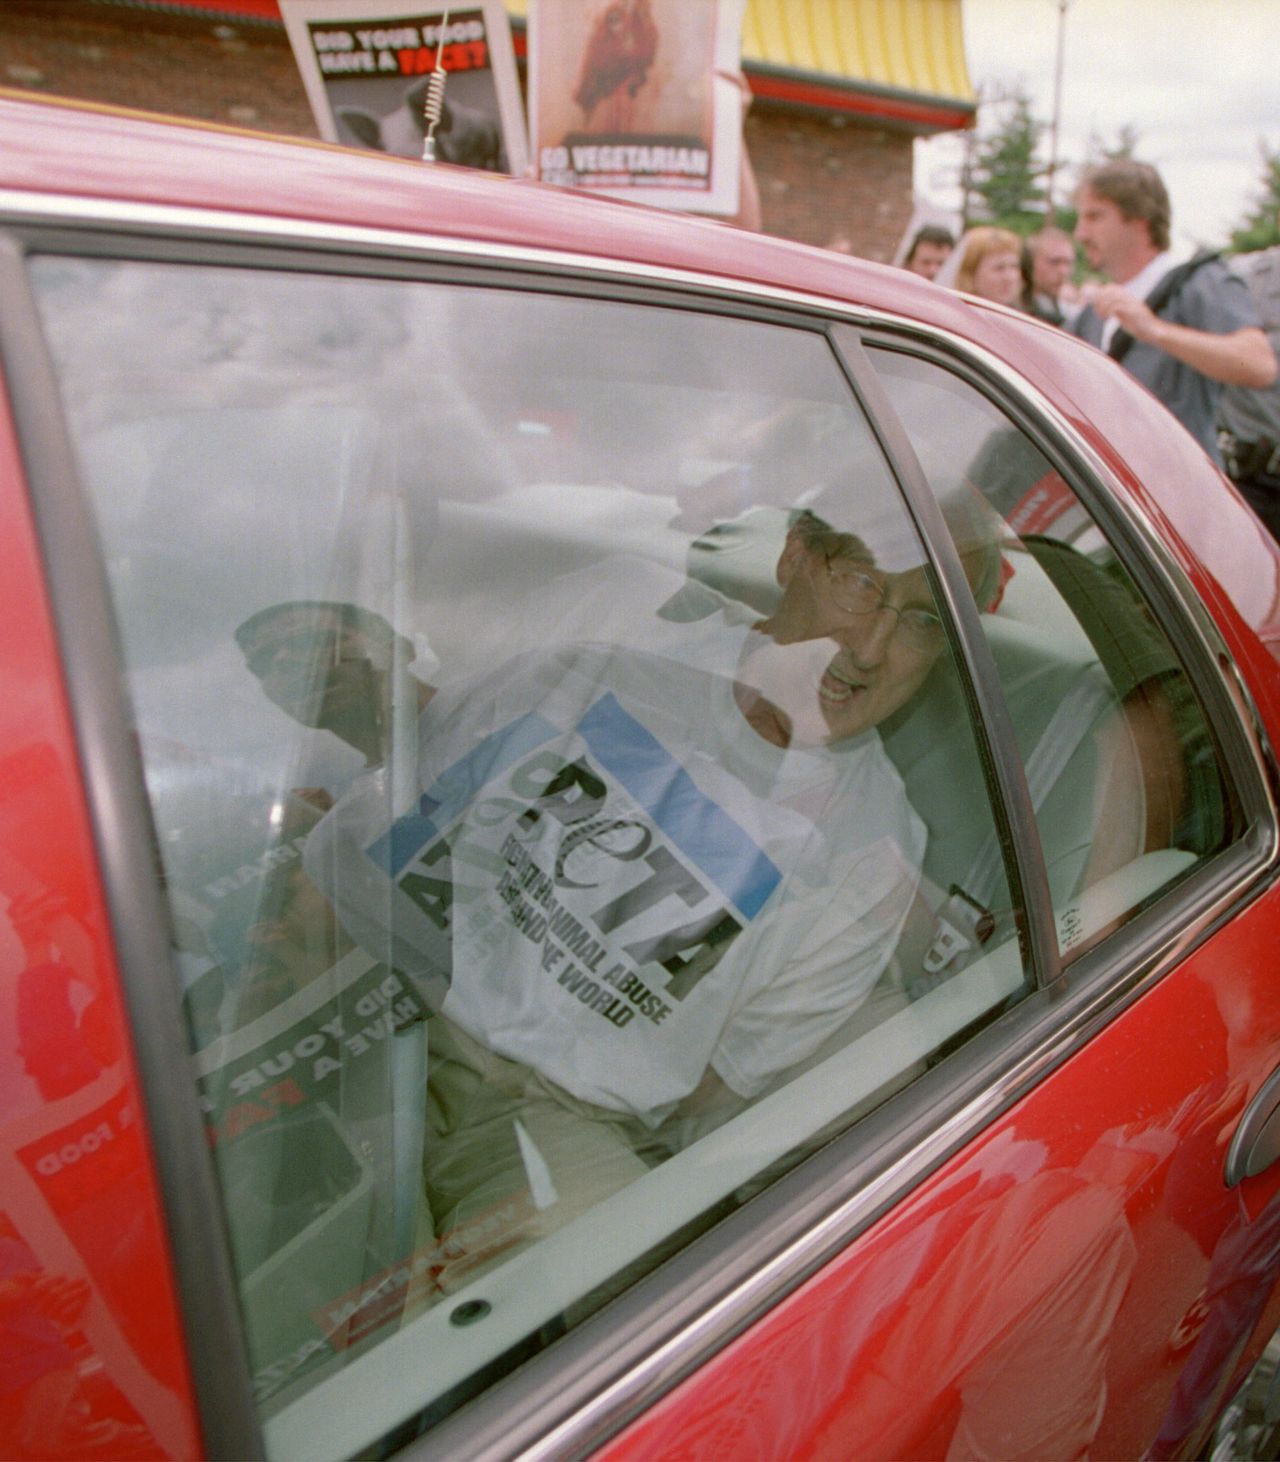 James Cromwell sits in an unmarked police car after being arrested on July 3, 2001, during a demonstration at a Wendy's restaurant in Tysons Corner, Virginia.